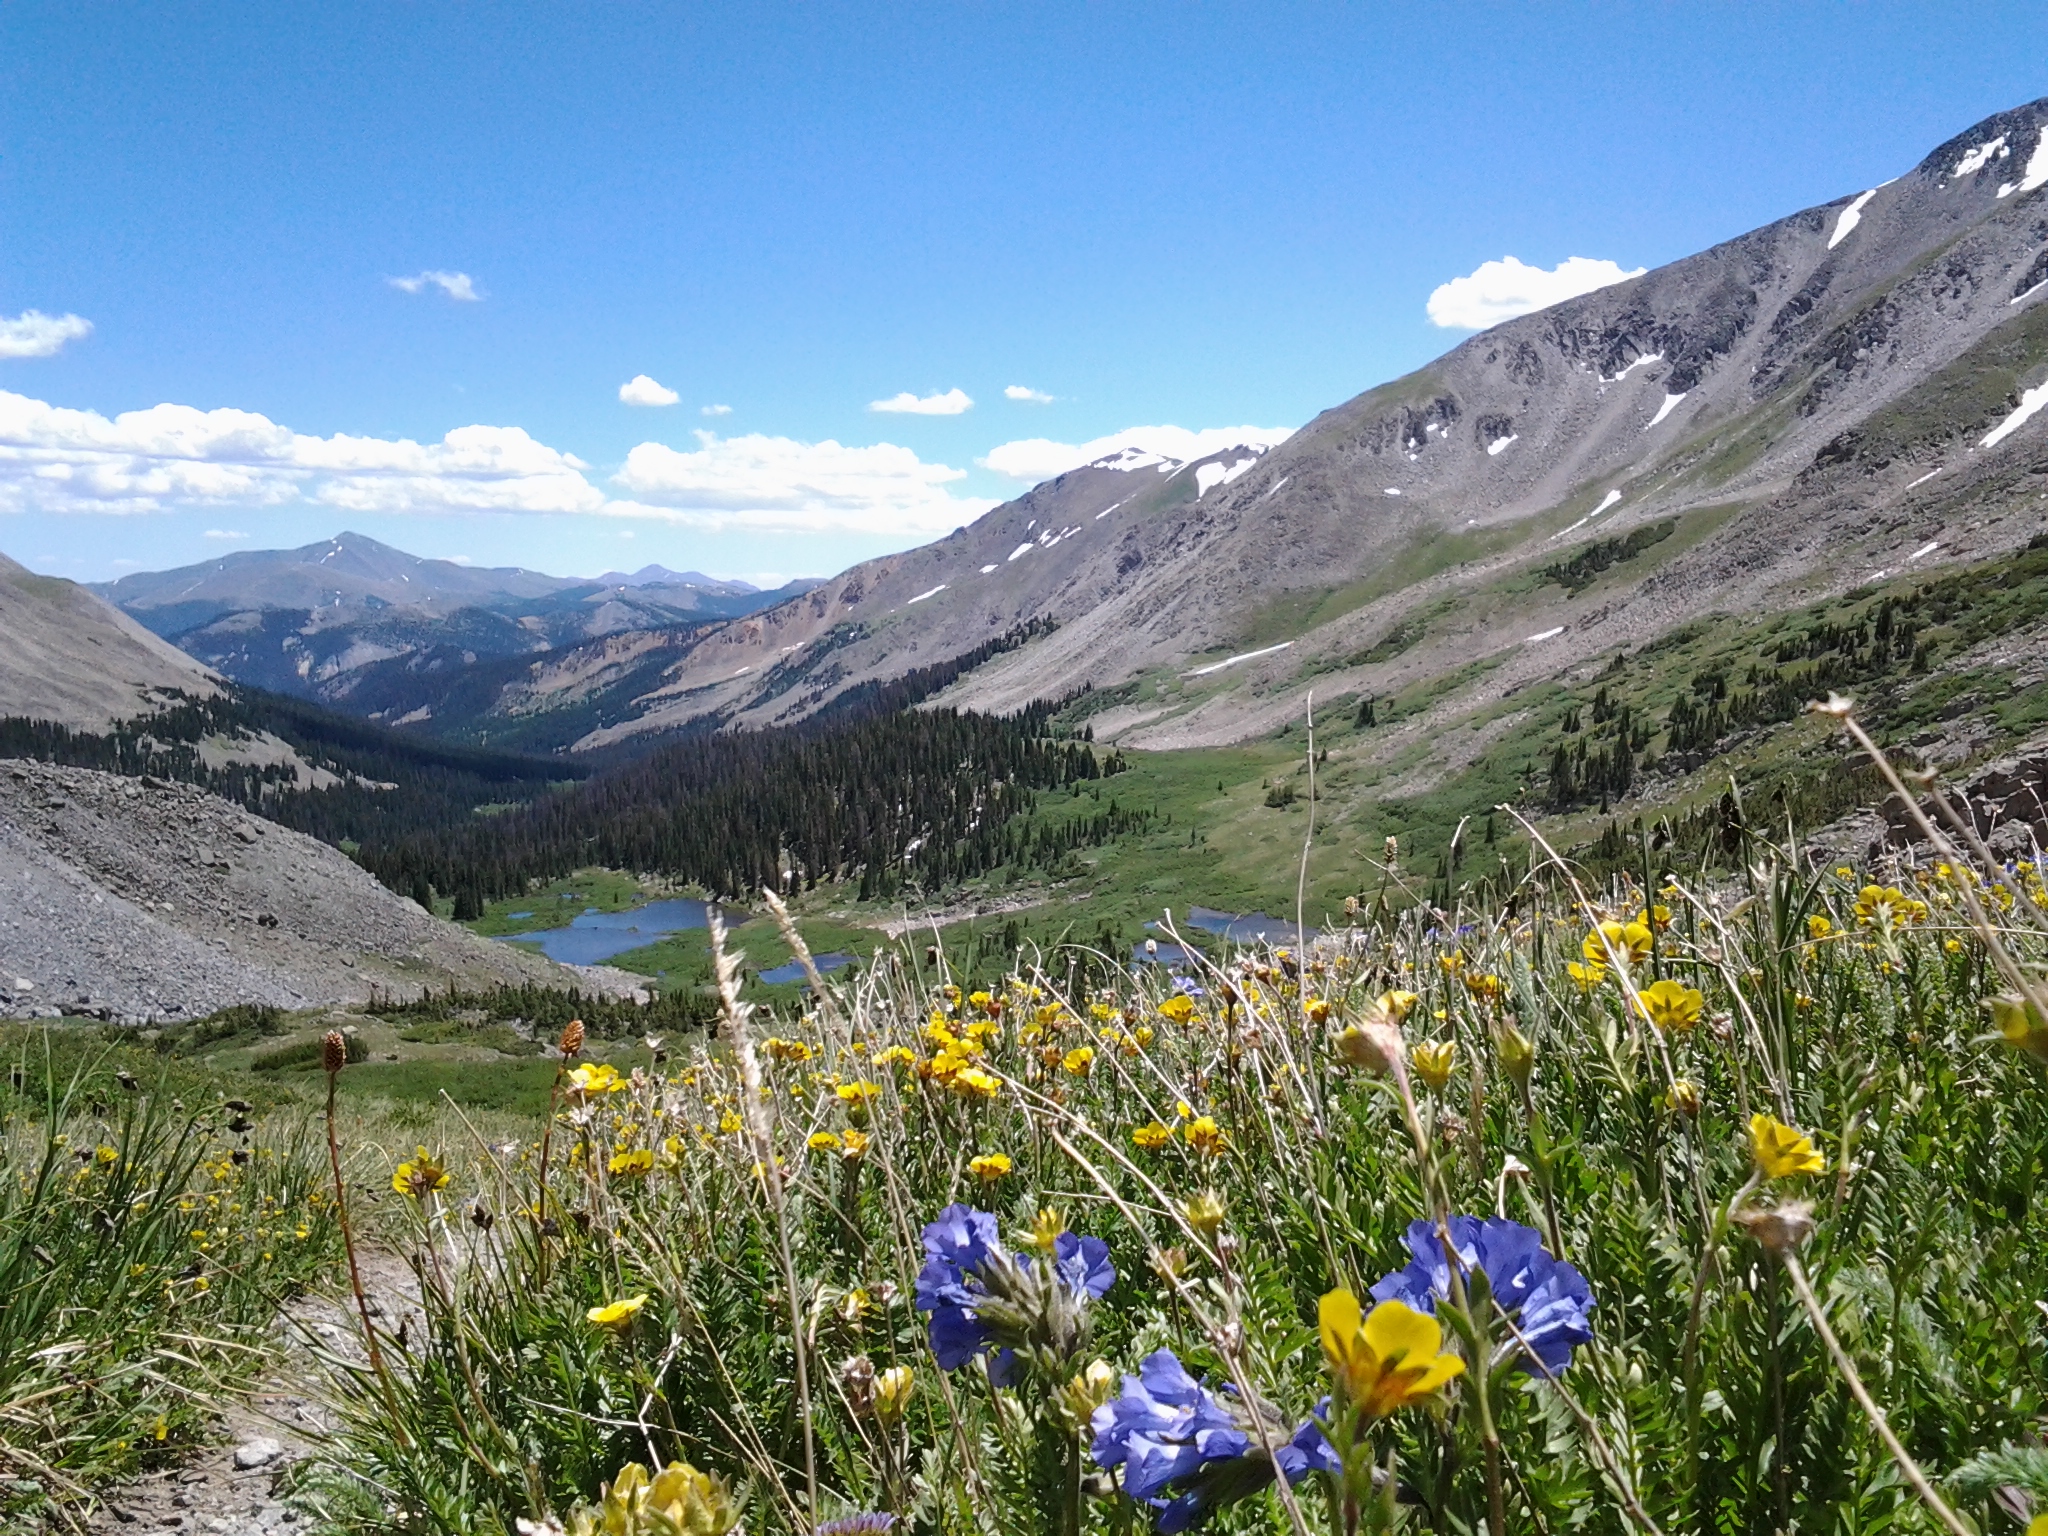 Top of a hiking trail with purple and yellow wildflowers all around with a small lake below.